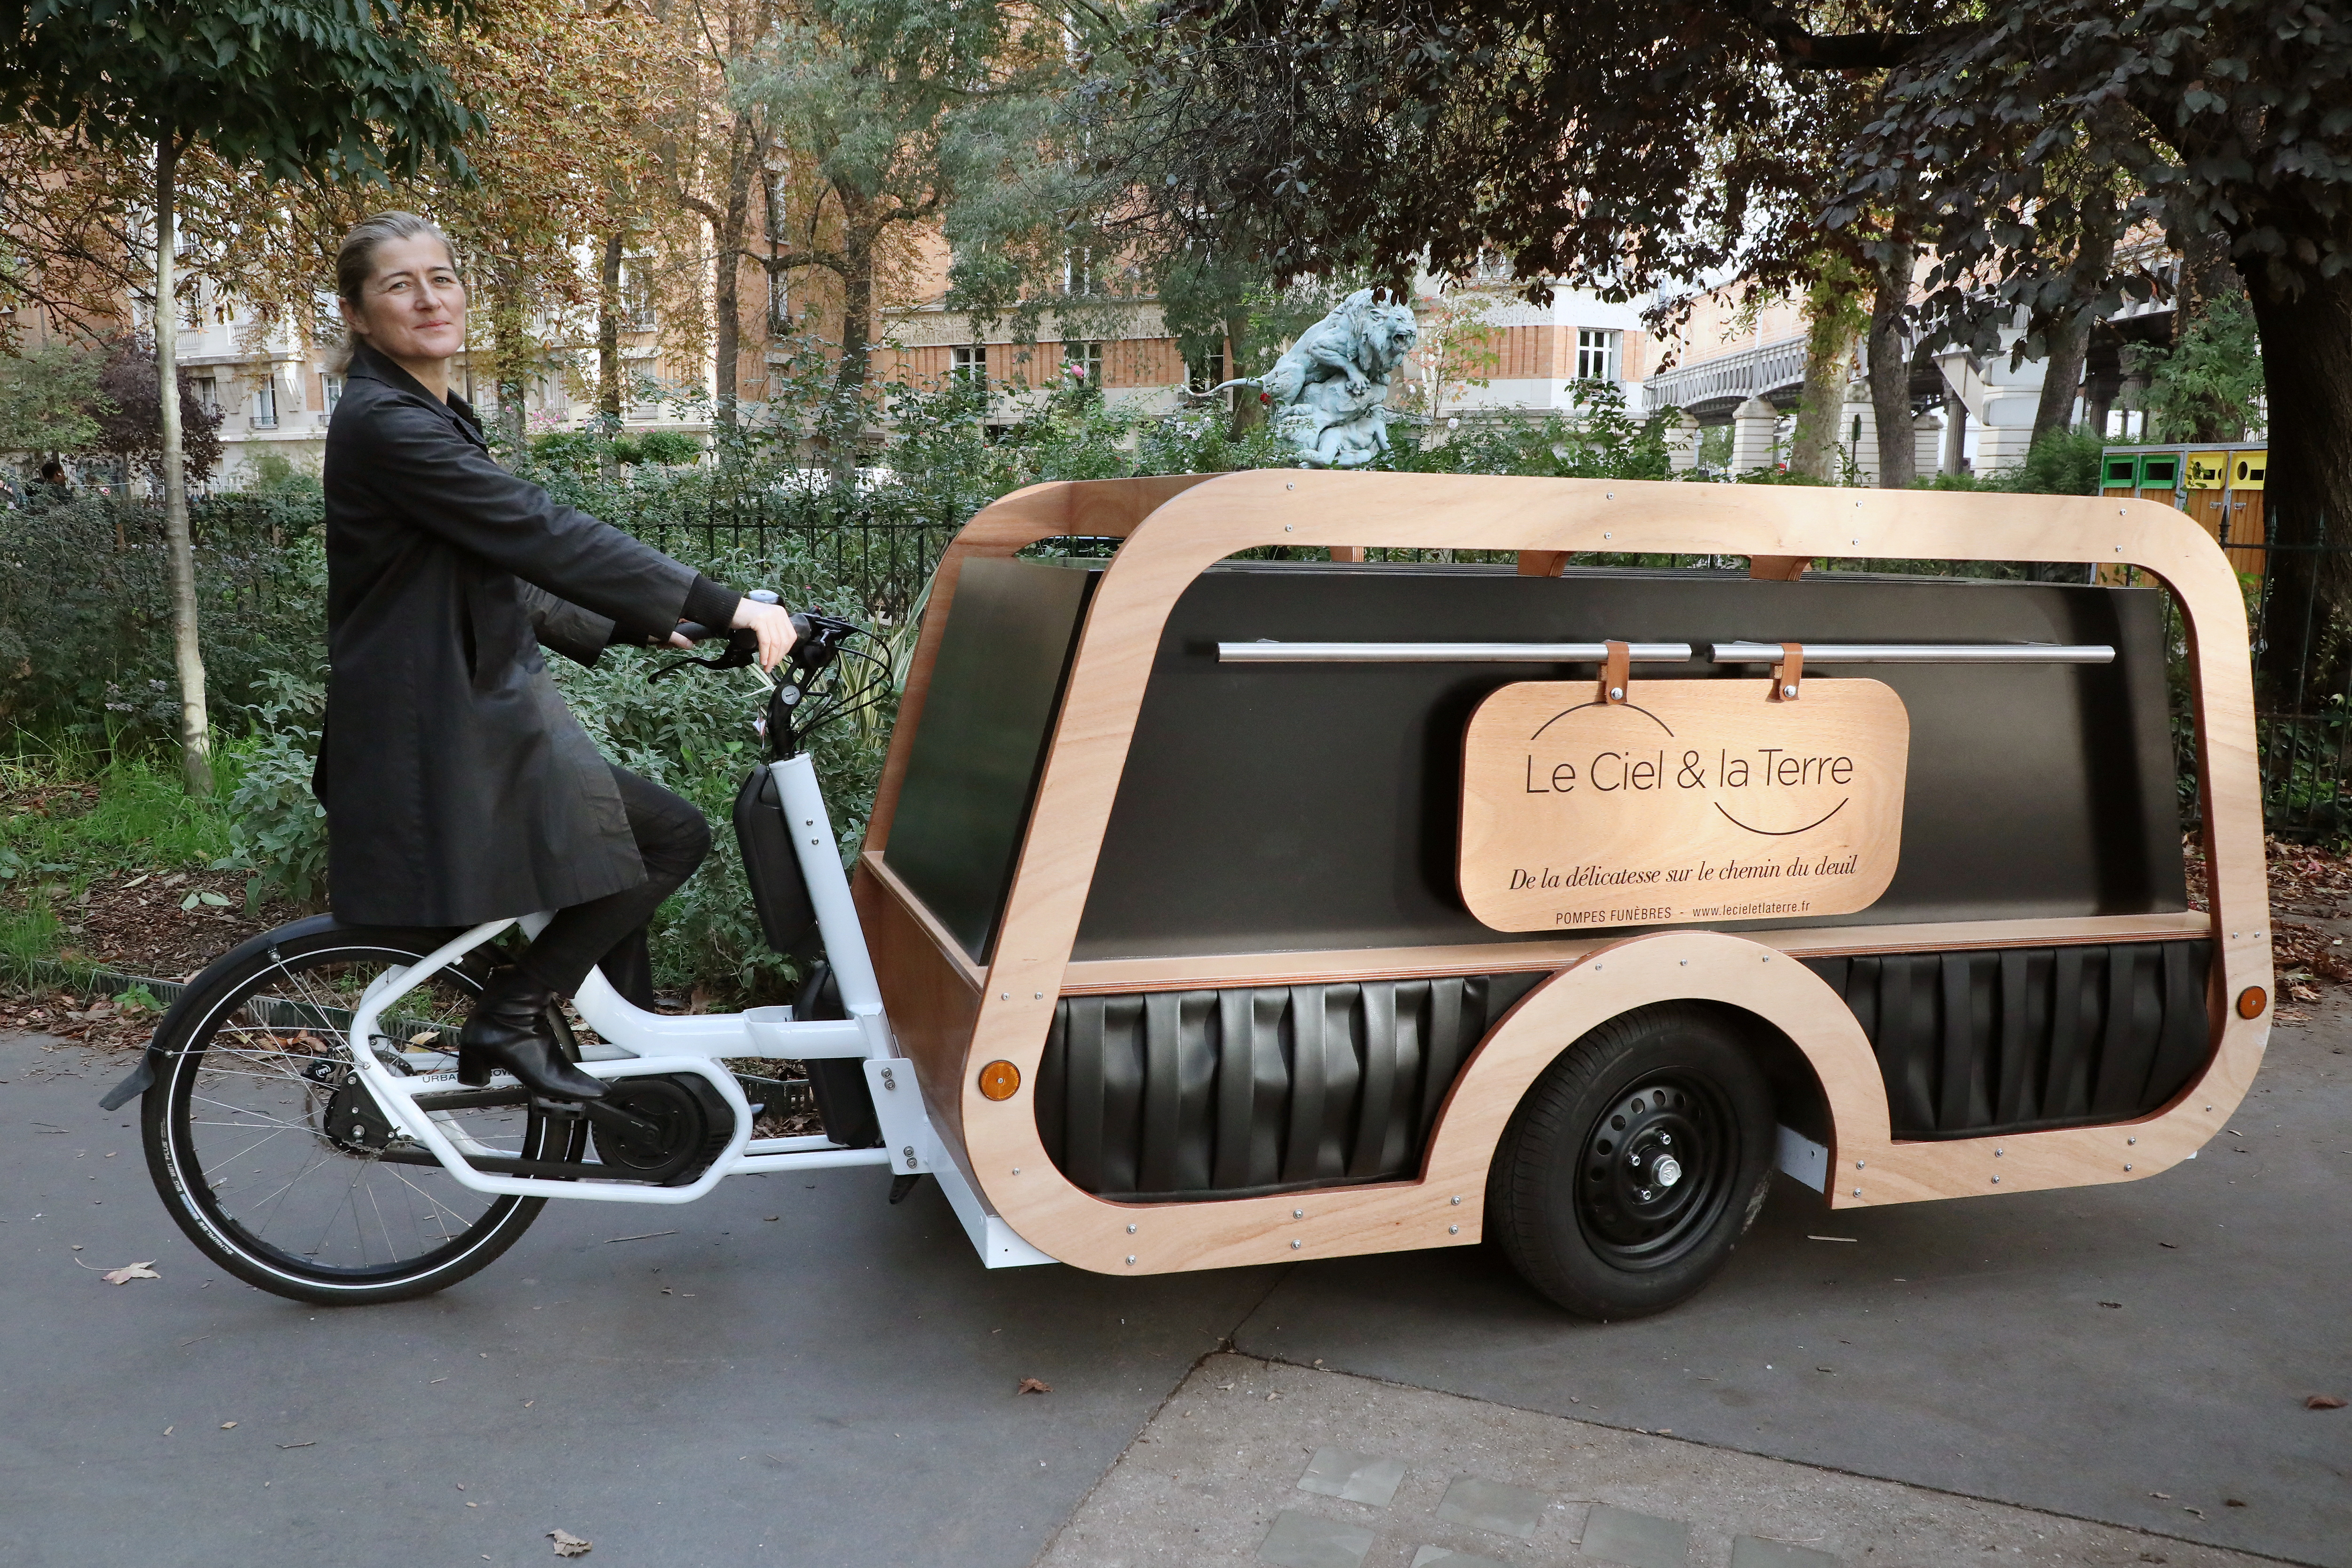 Parisian undertaker aims to introduce bicycle hearse in France